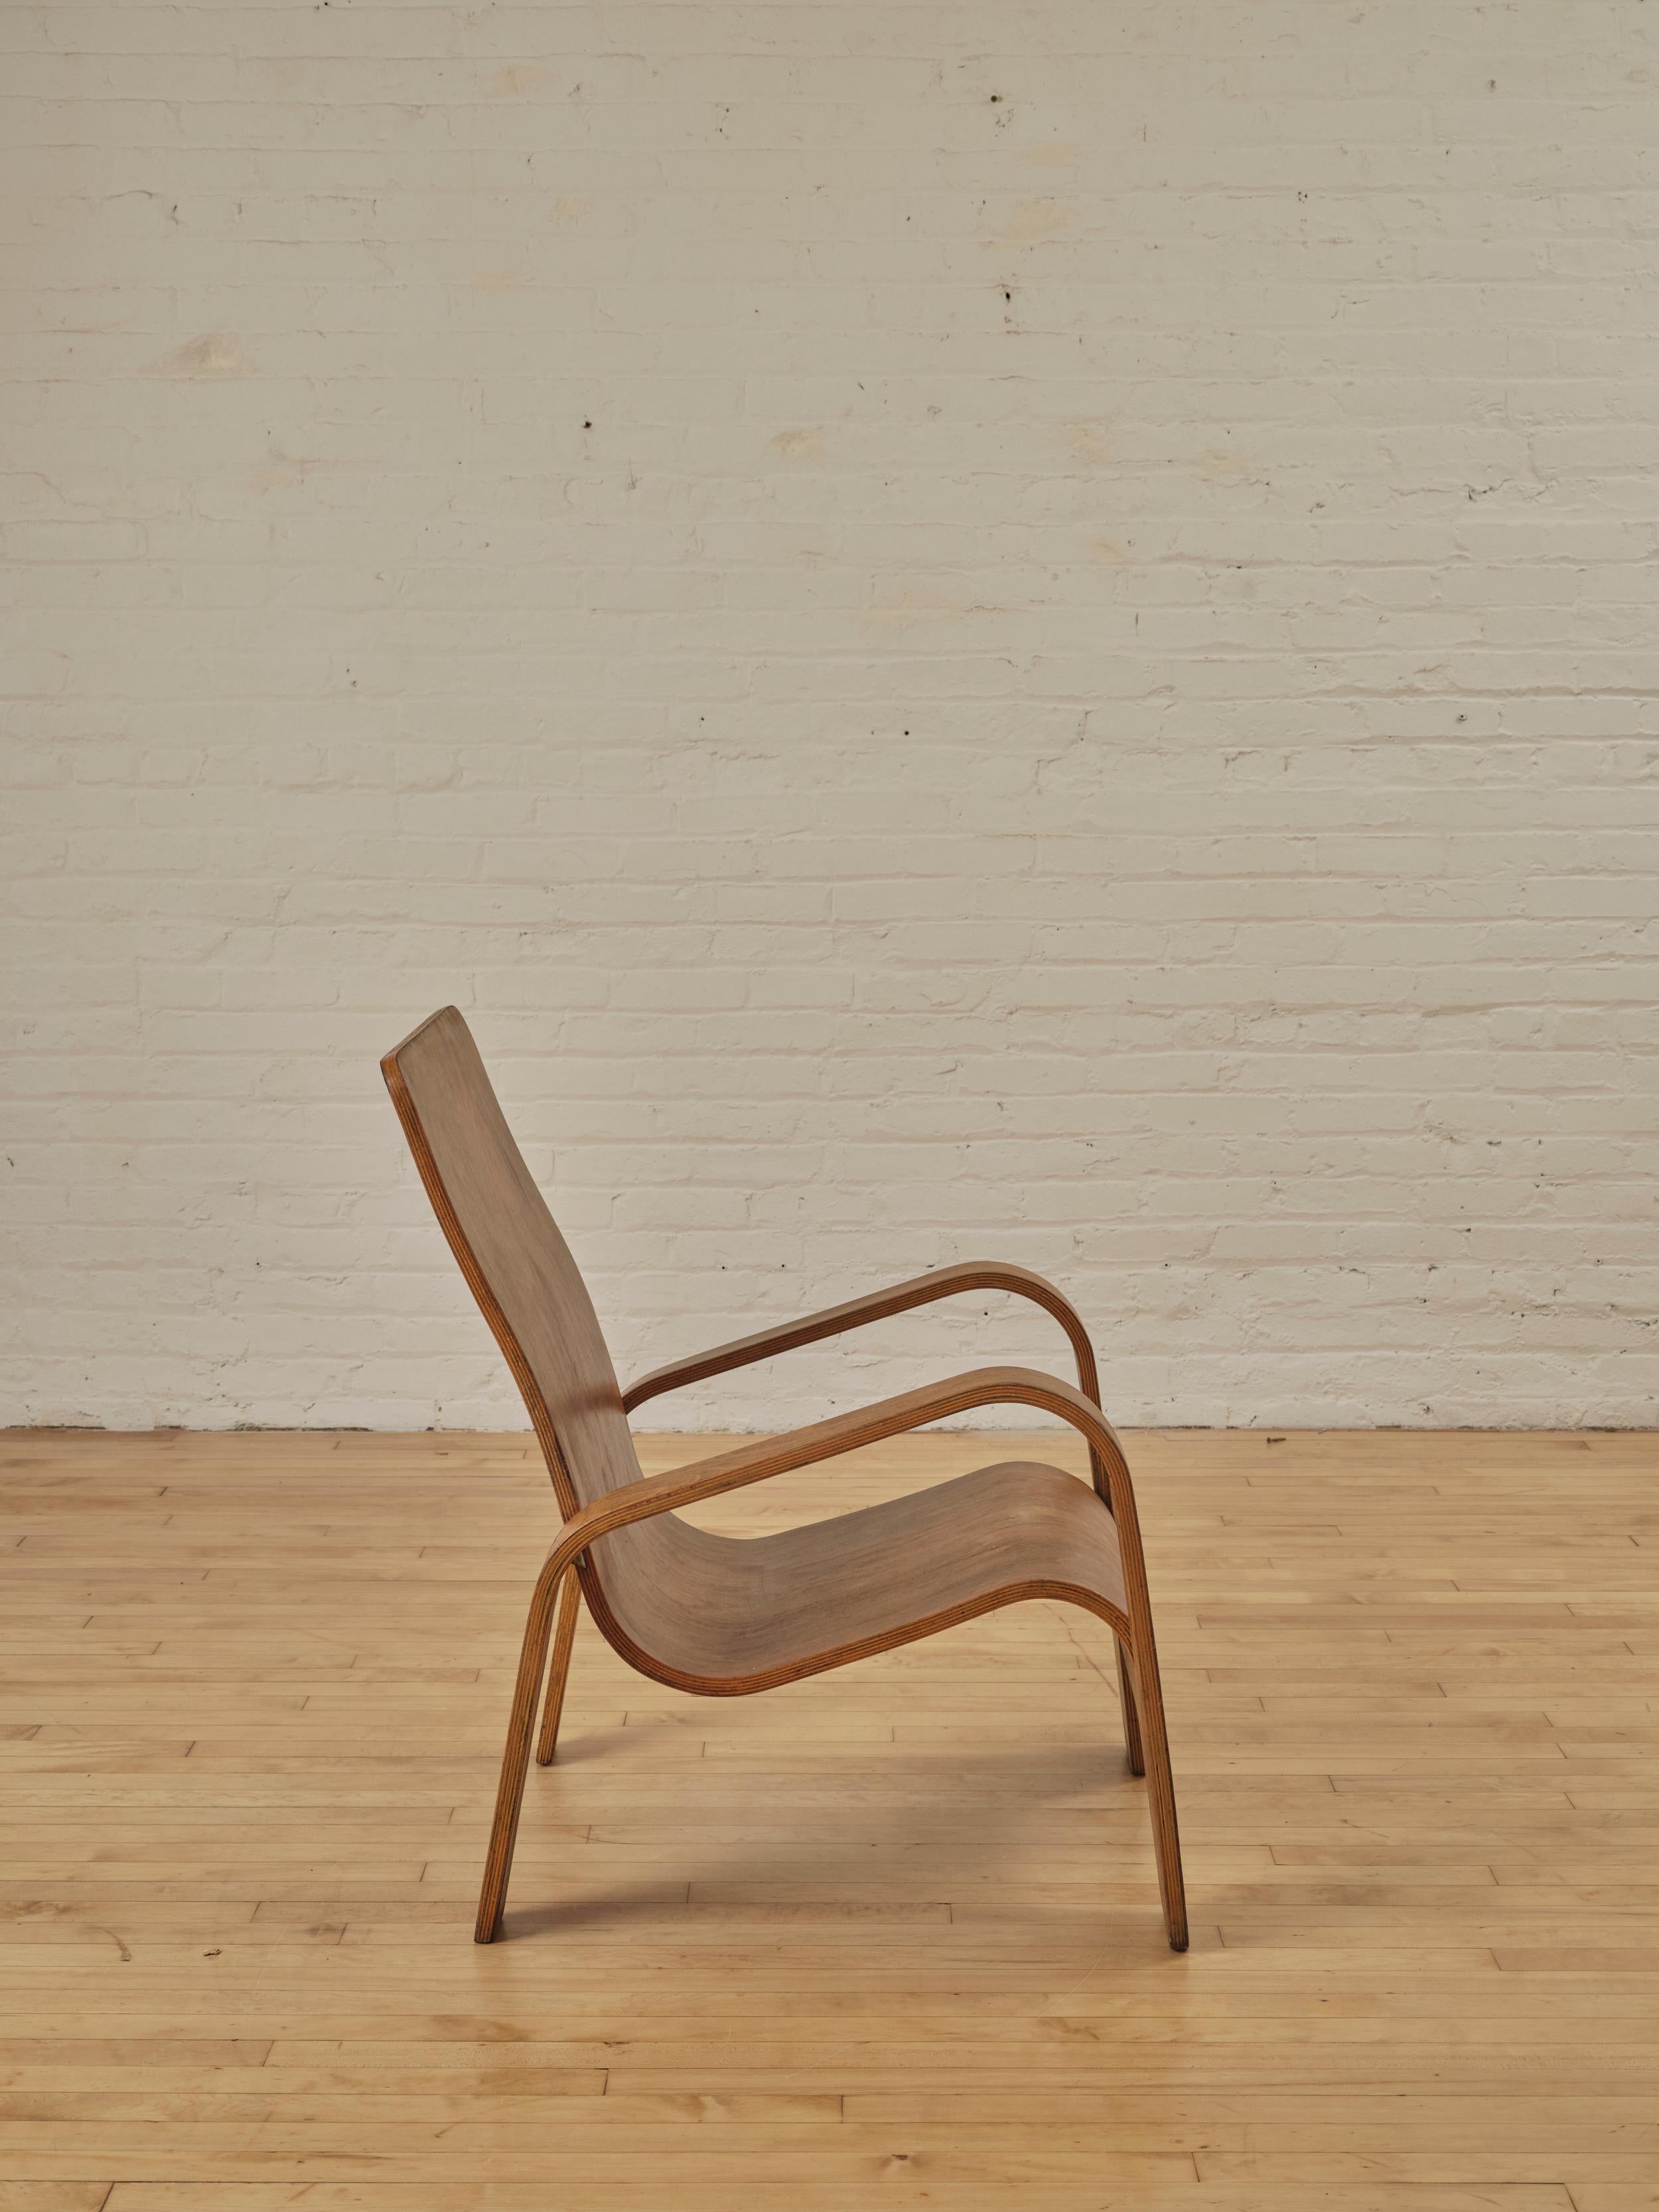 LaWo1 Wooden Lounge Chair by Han Pieck for Lawo Ommen, The Netherlands. This rare dutch modern chair is brilliantly designed and made from several layers of birch plywood. The back legs are fixed to the seat back by brass brackets.

About Han Pieck: